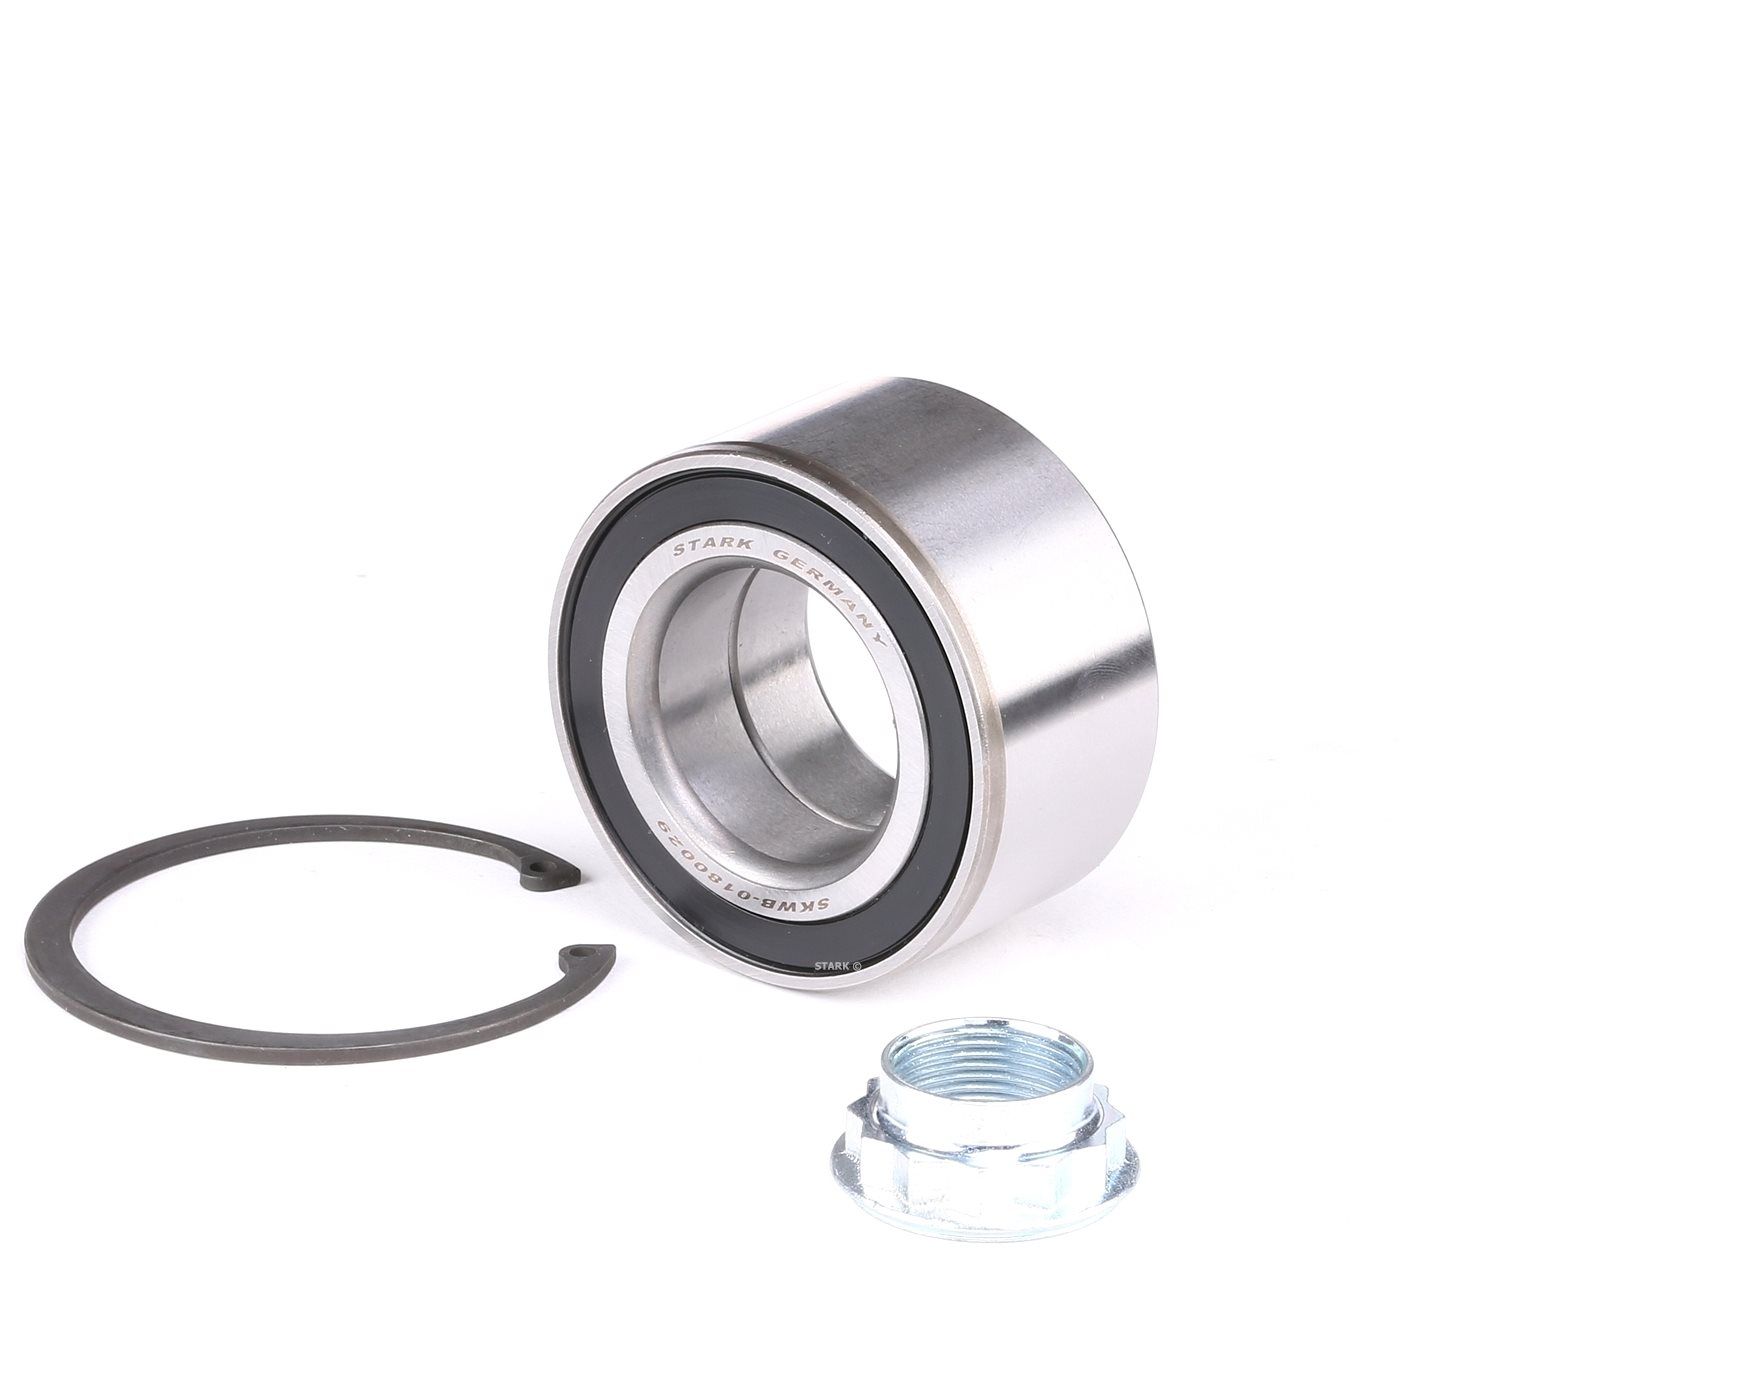 STARK SKWB-0180029 Wheel bearing kit Rear Axle, Rear Axle both sides, Front axle both sides, 72 mm